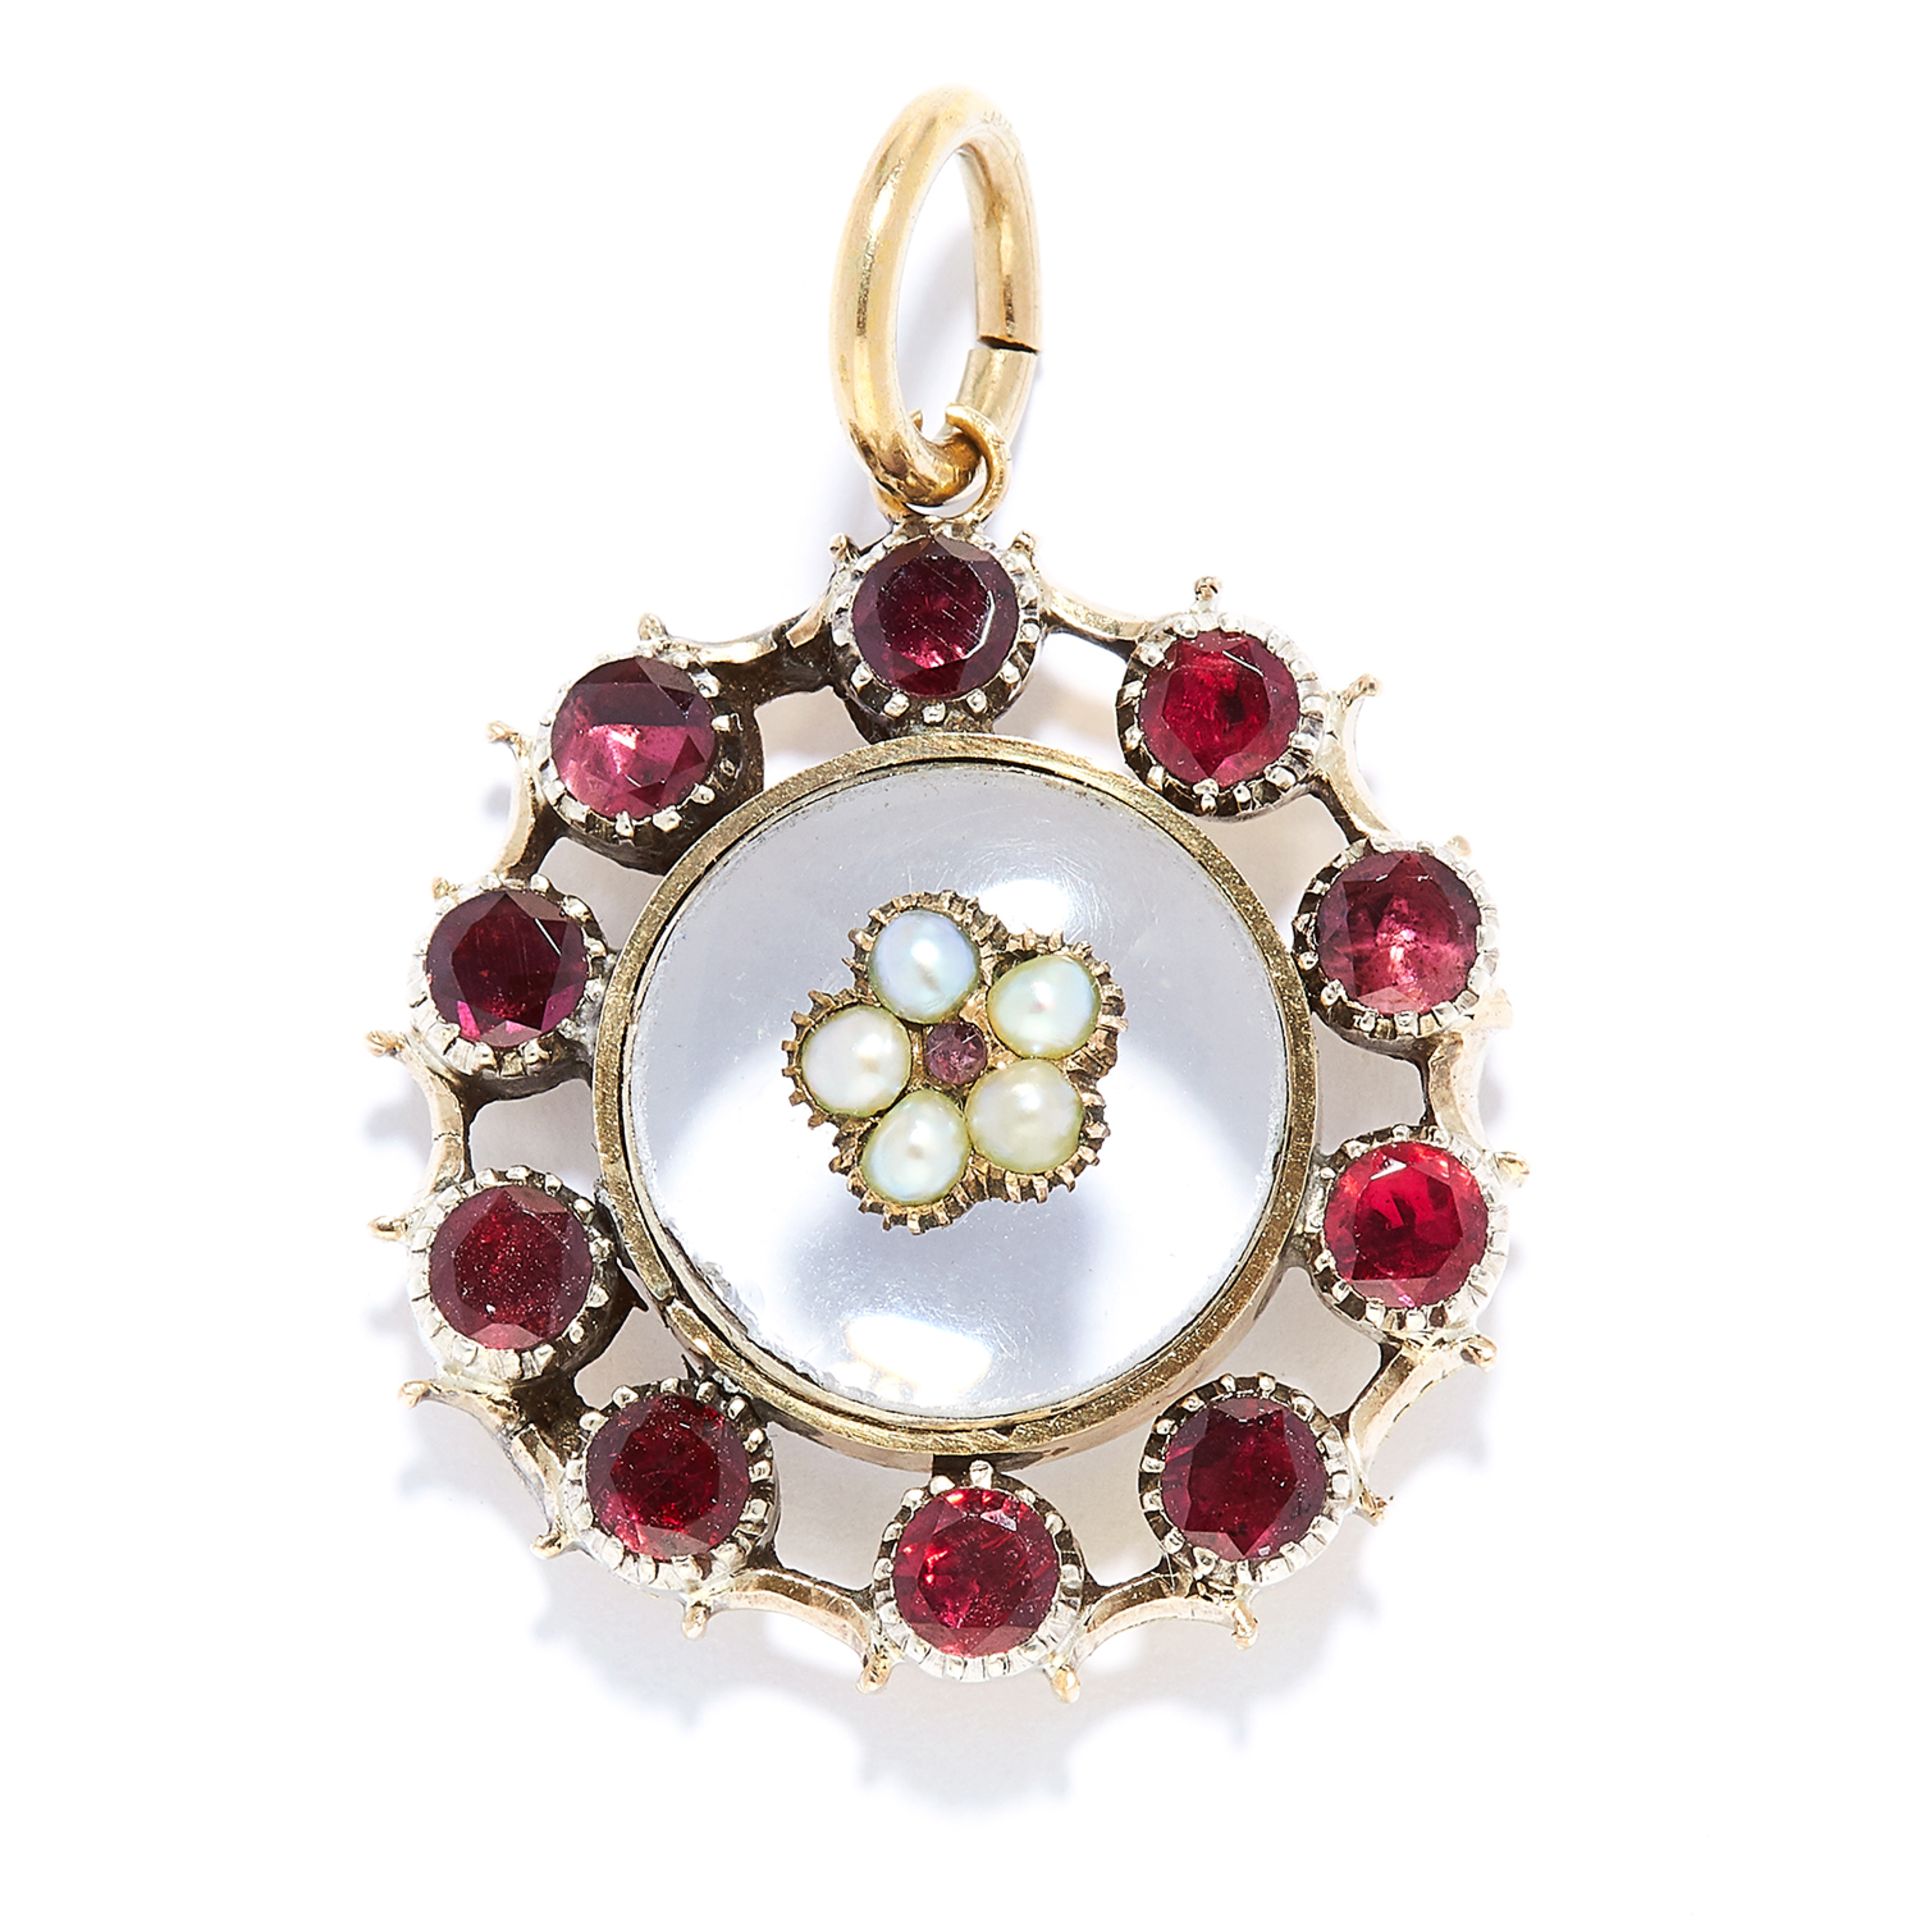 ANTIQUE GARNET, PEARL AND ROCK CRYSTAL PENDANT in high carat yellow gold, comprising of a cabochon